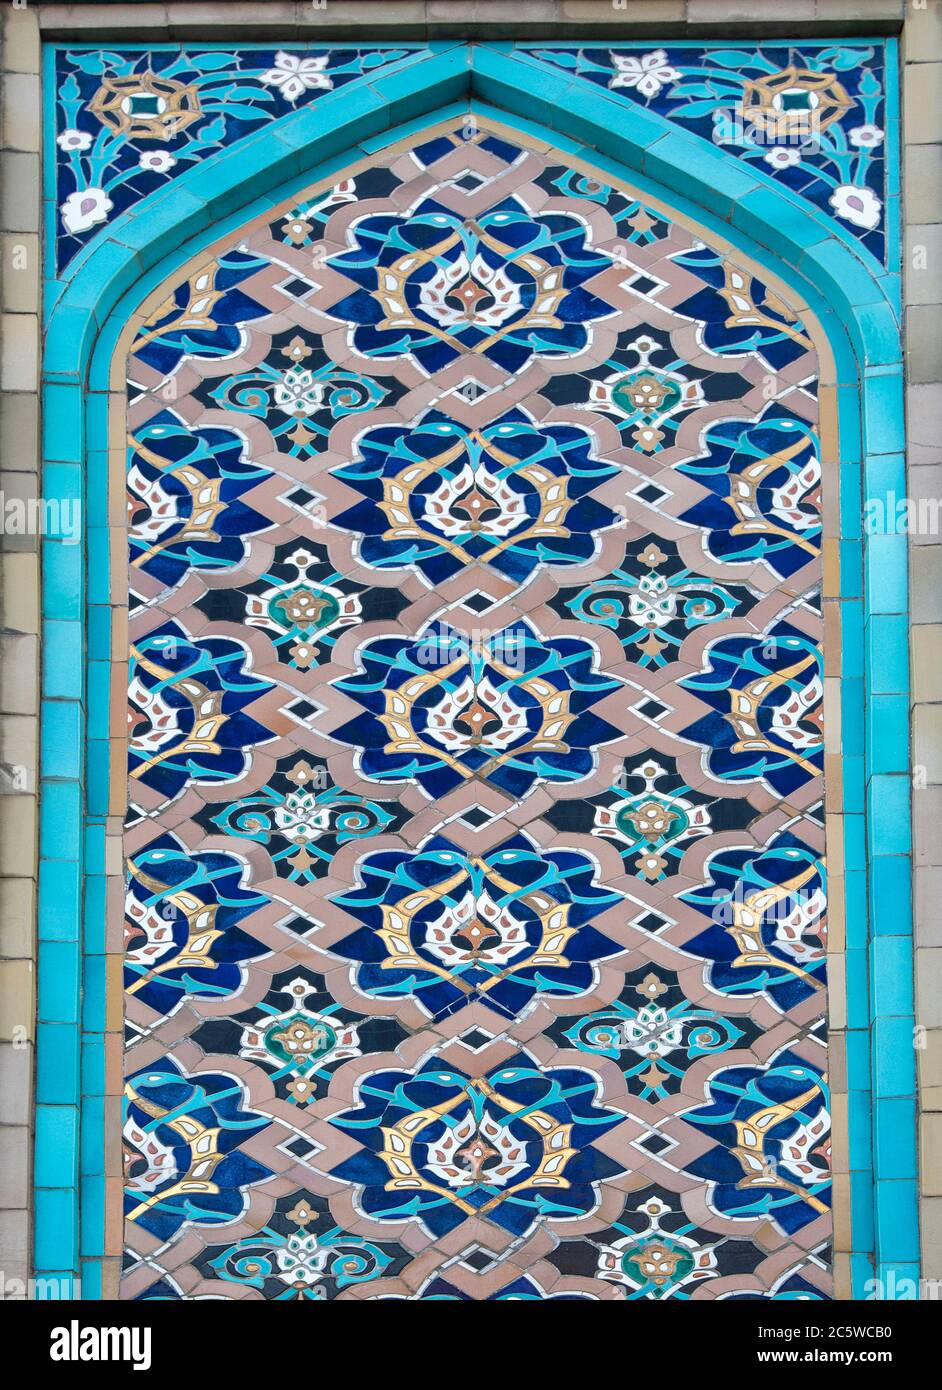 Saint Petersburg, Russia. The Saint Petersburg Mosque in Russia. its minarets 49 meters in height and the dome is 39 meters high. Mosaic decoration Stock Photo